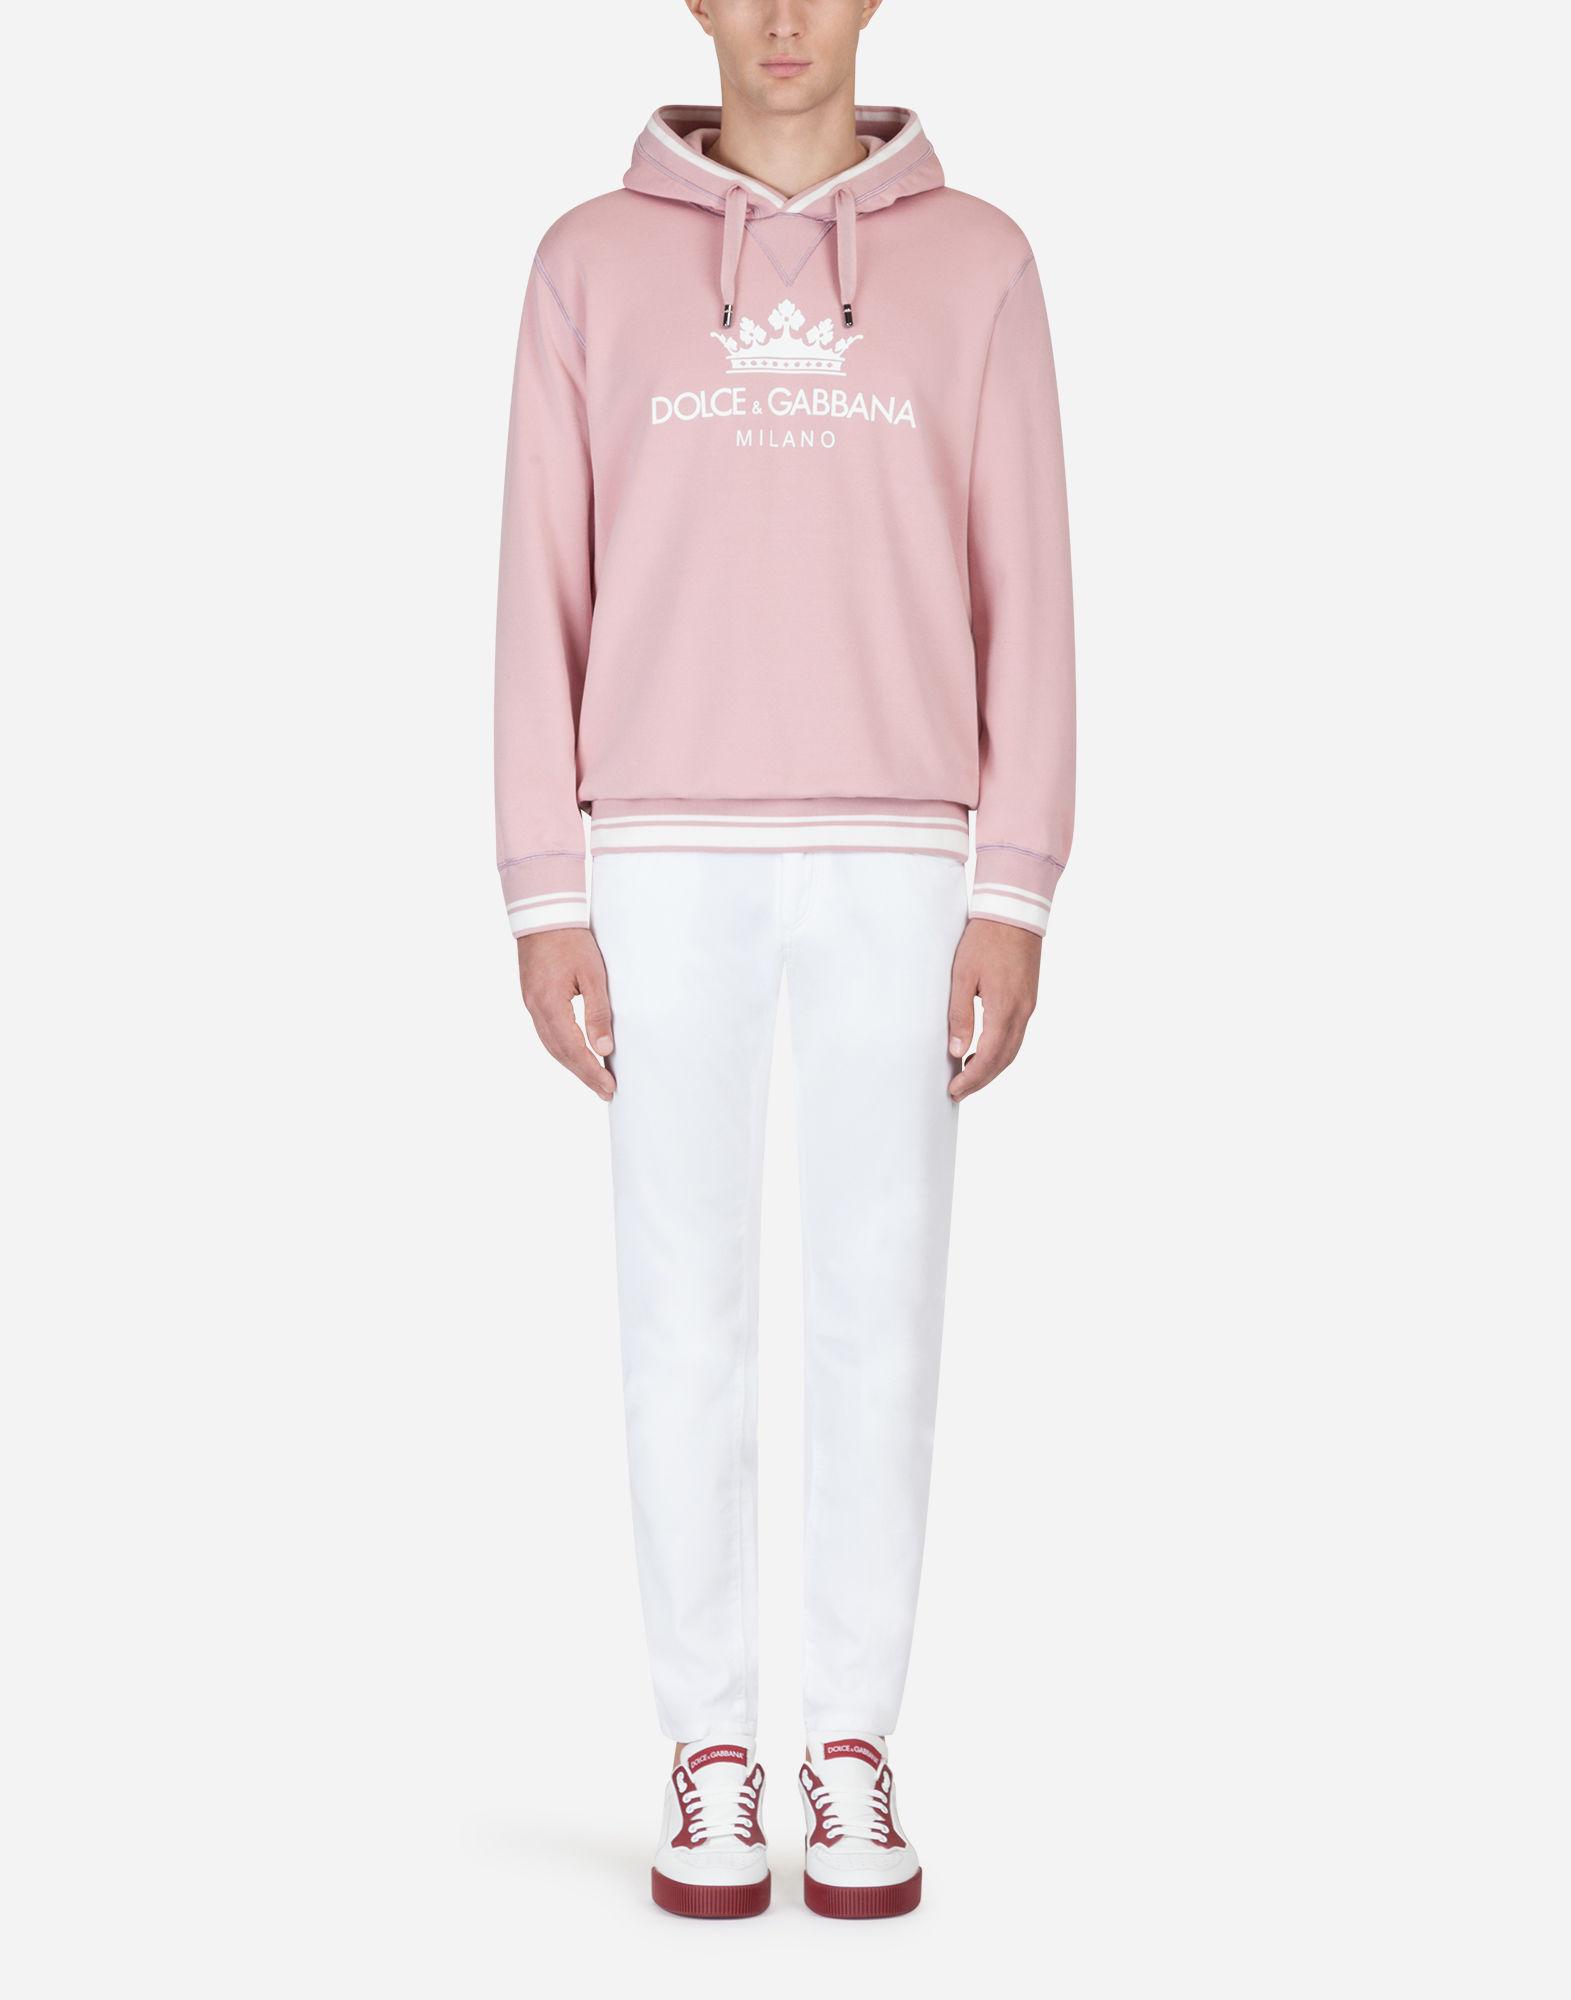 Dolce & Gabbana Sweatshirt In Cotton With Hood And Dolce&gabbana Milano  Print in Pink for Men | Lyst